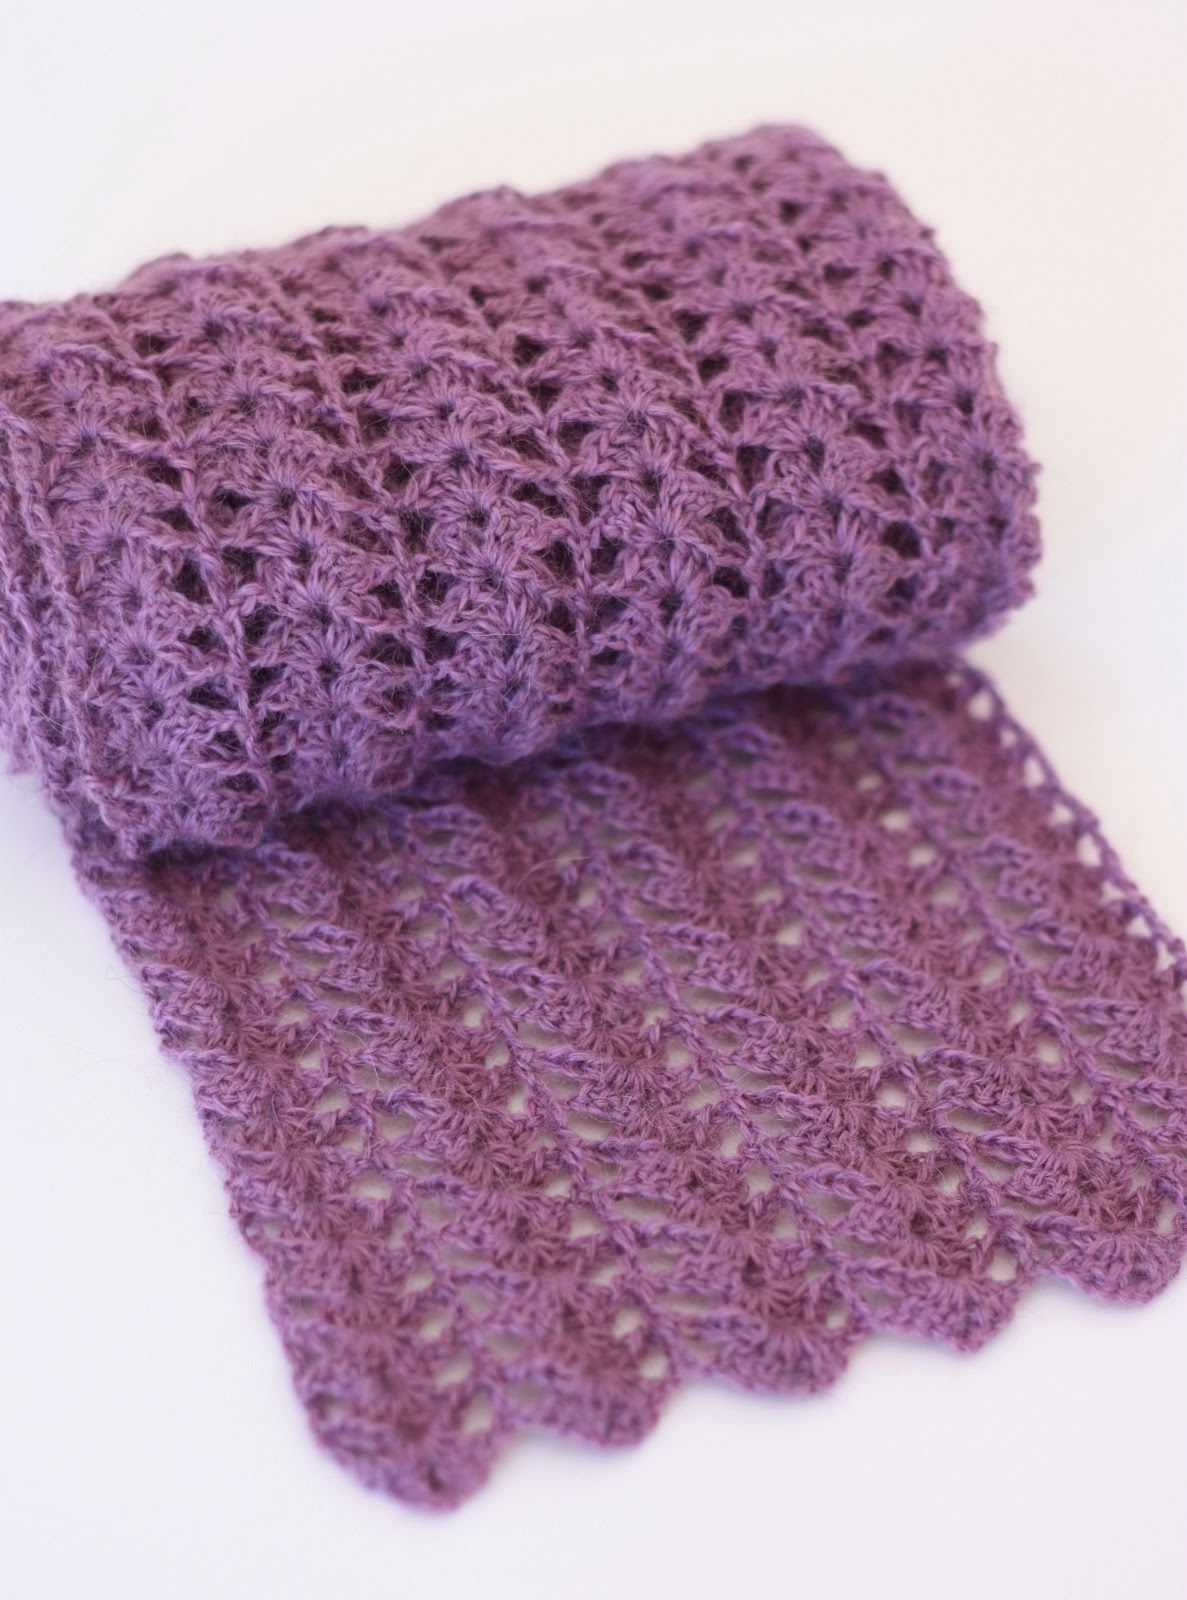 Easy Scarf Crochet Patterns 9 Gorgeous Free Scarf Crochet Patterns Crochetknit Pinterest